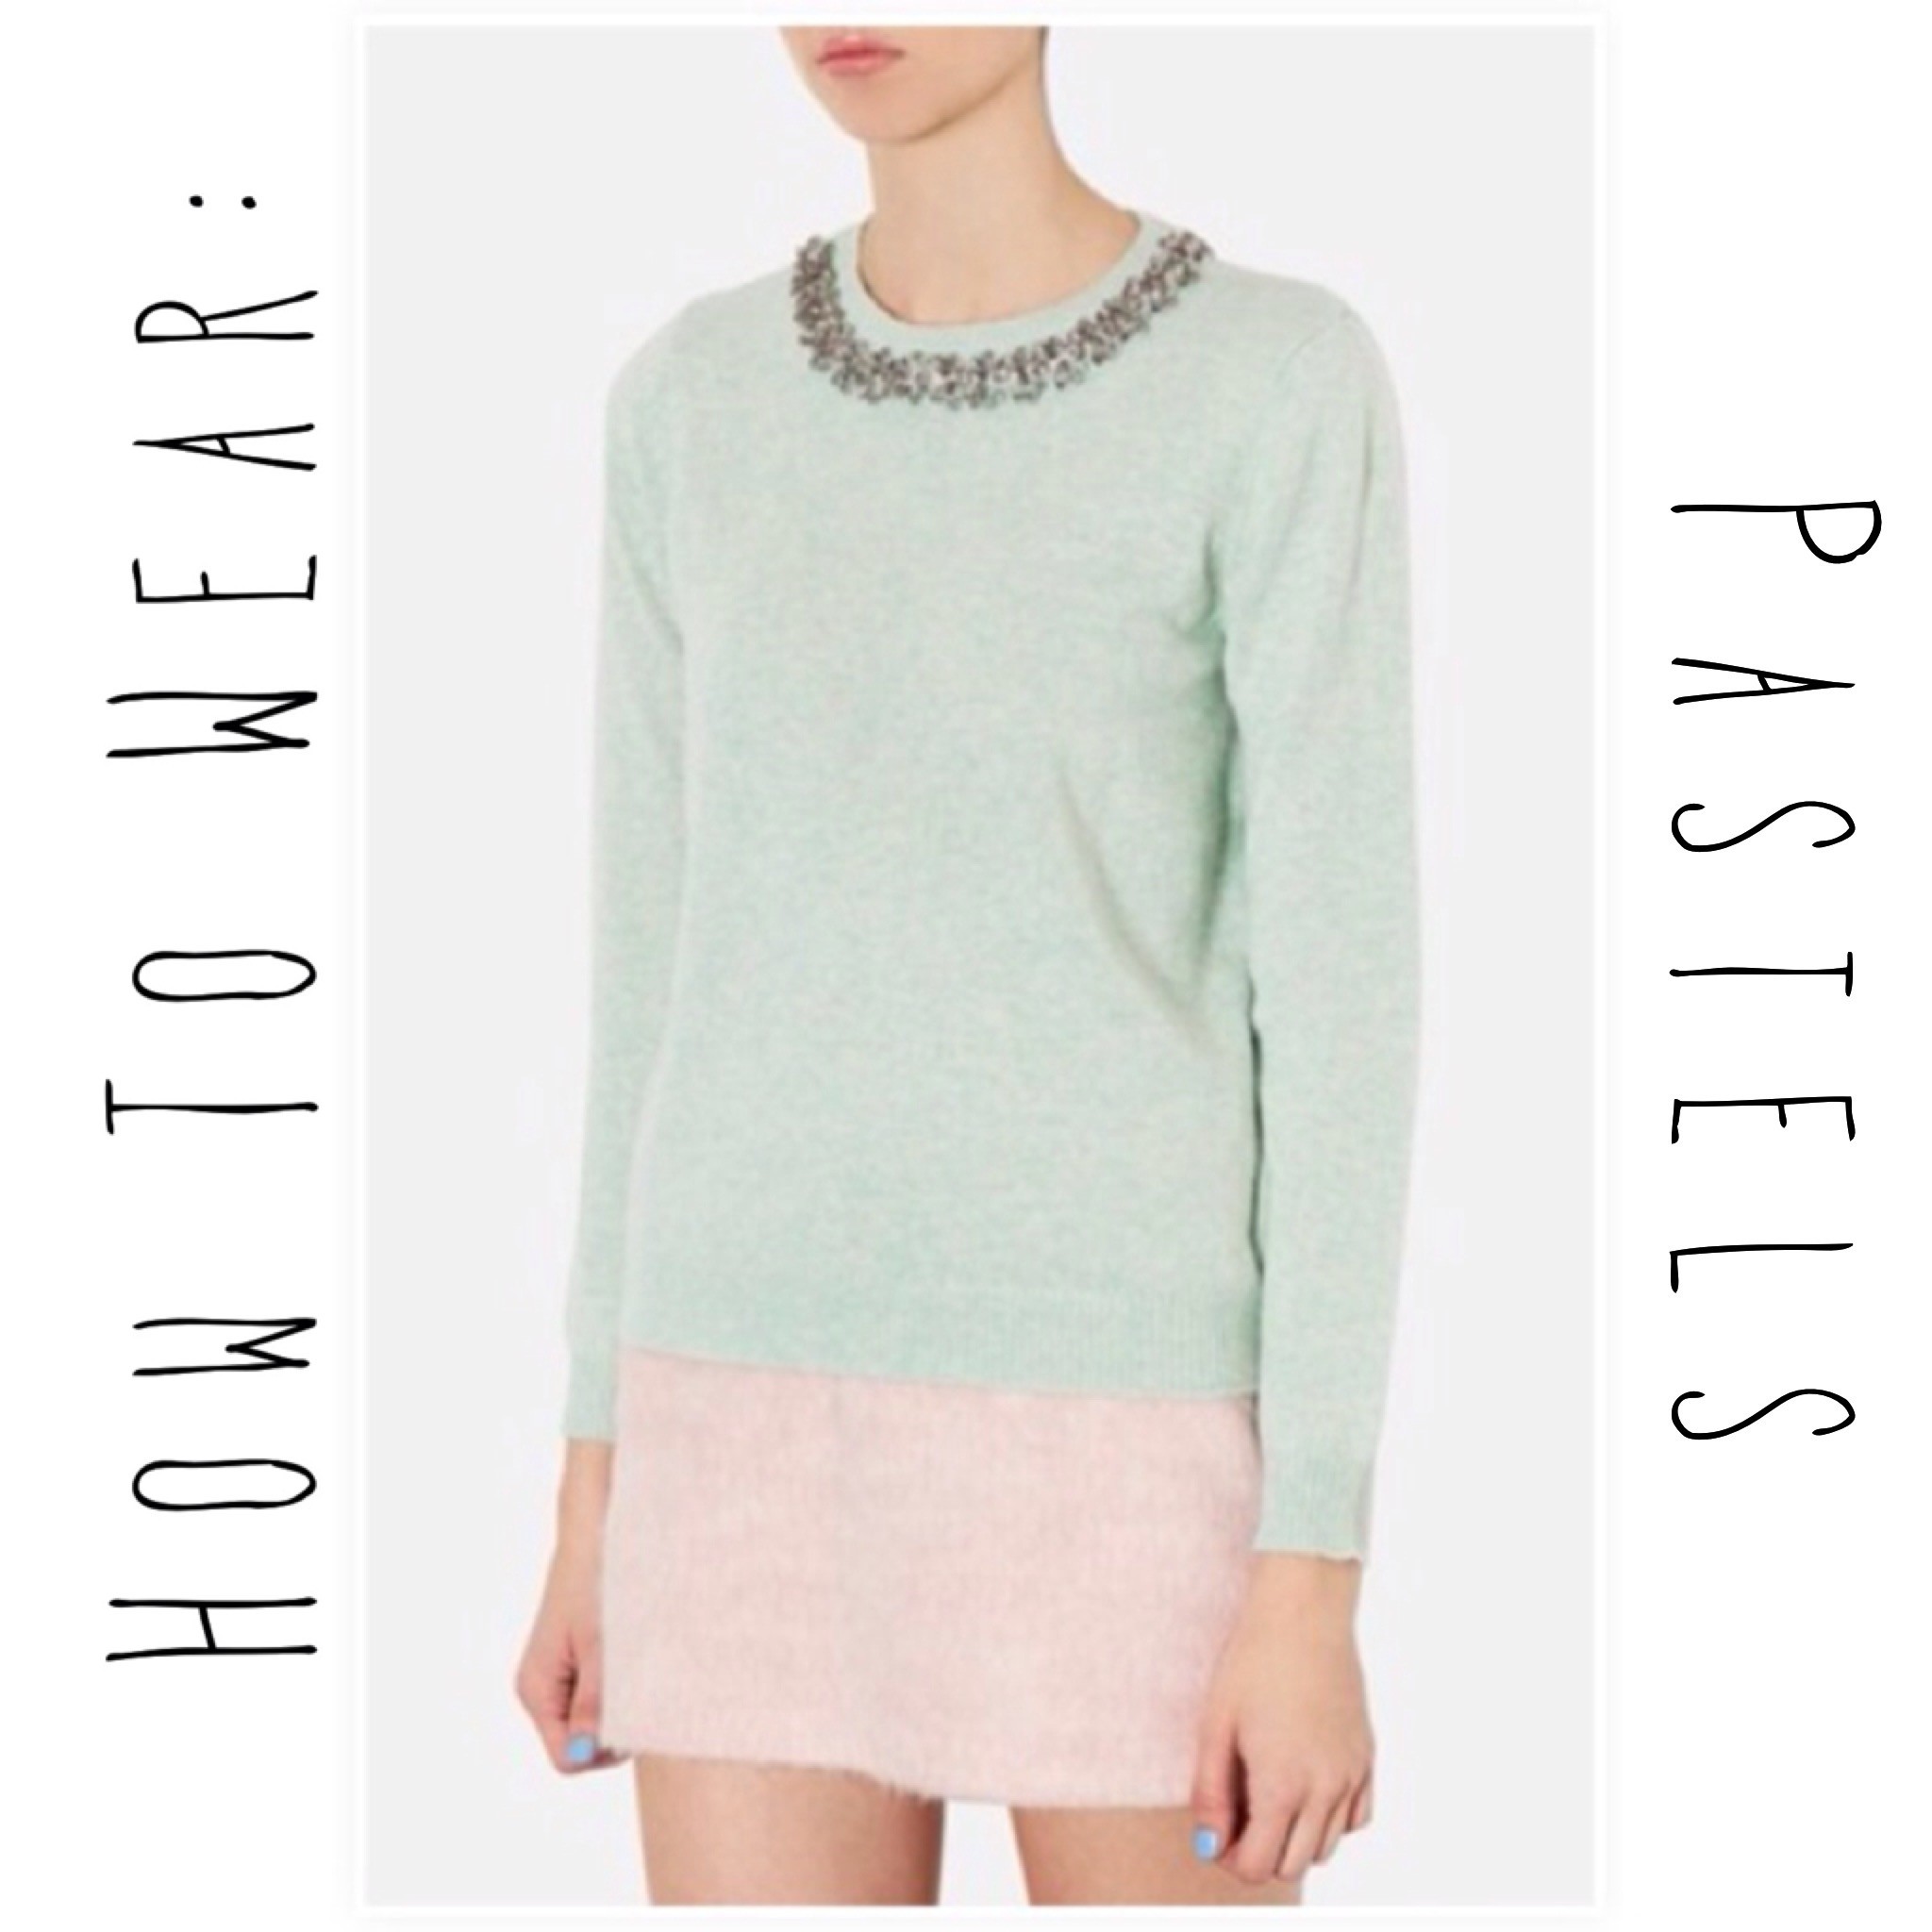 How To Wear: Pastels!